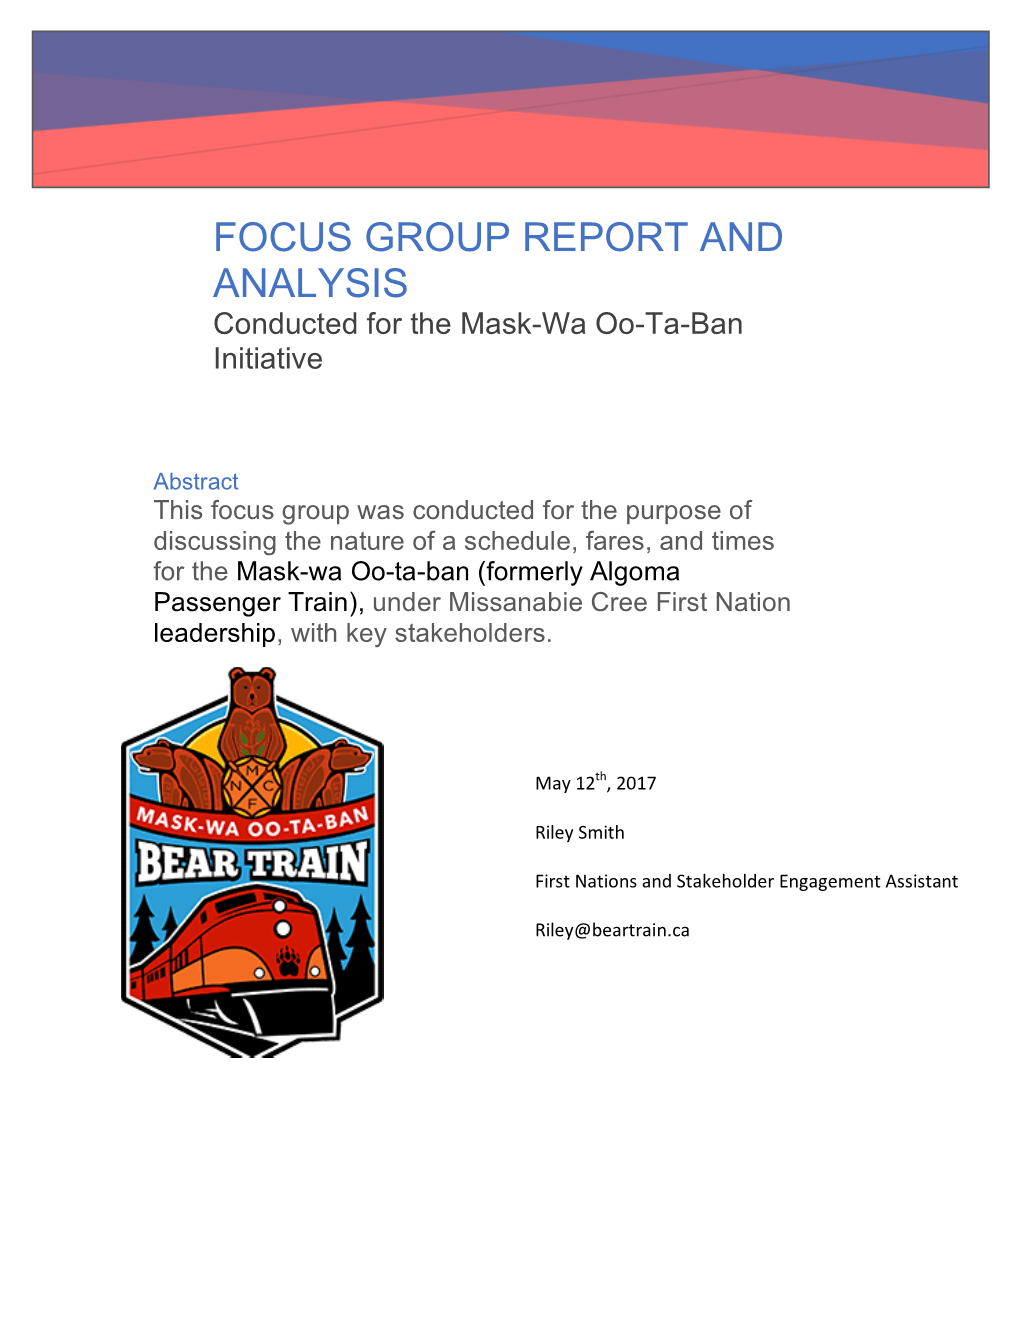 FOCUS GROUP REPORT and ANALYSIS Conducted for the Mask-Wa Oo-Ta-Ban Initiative